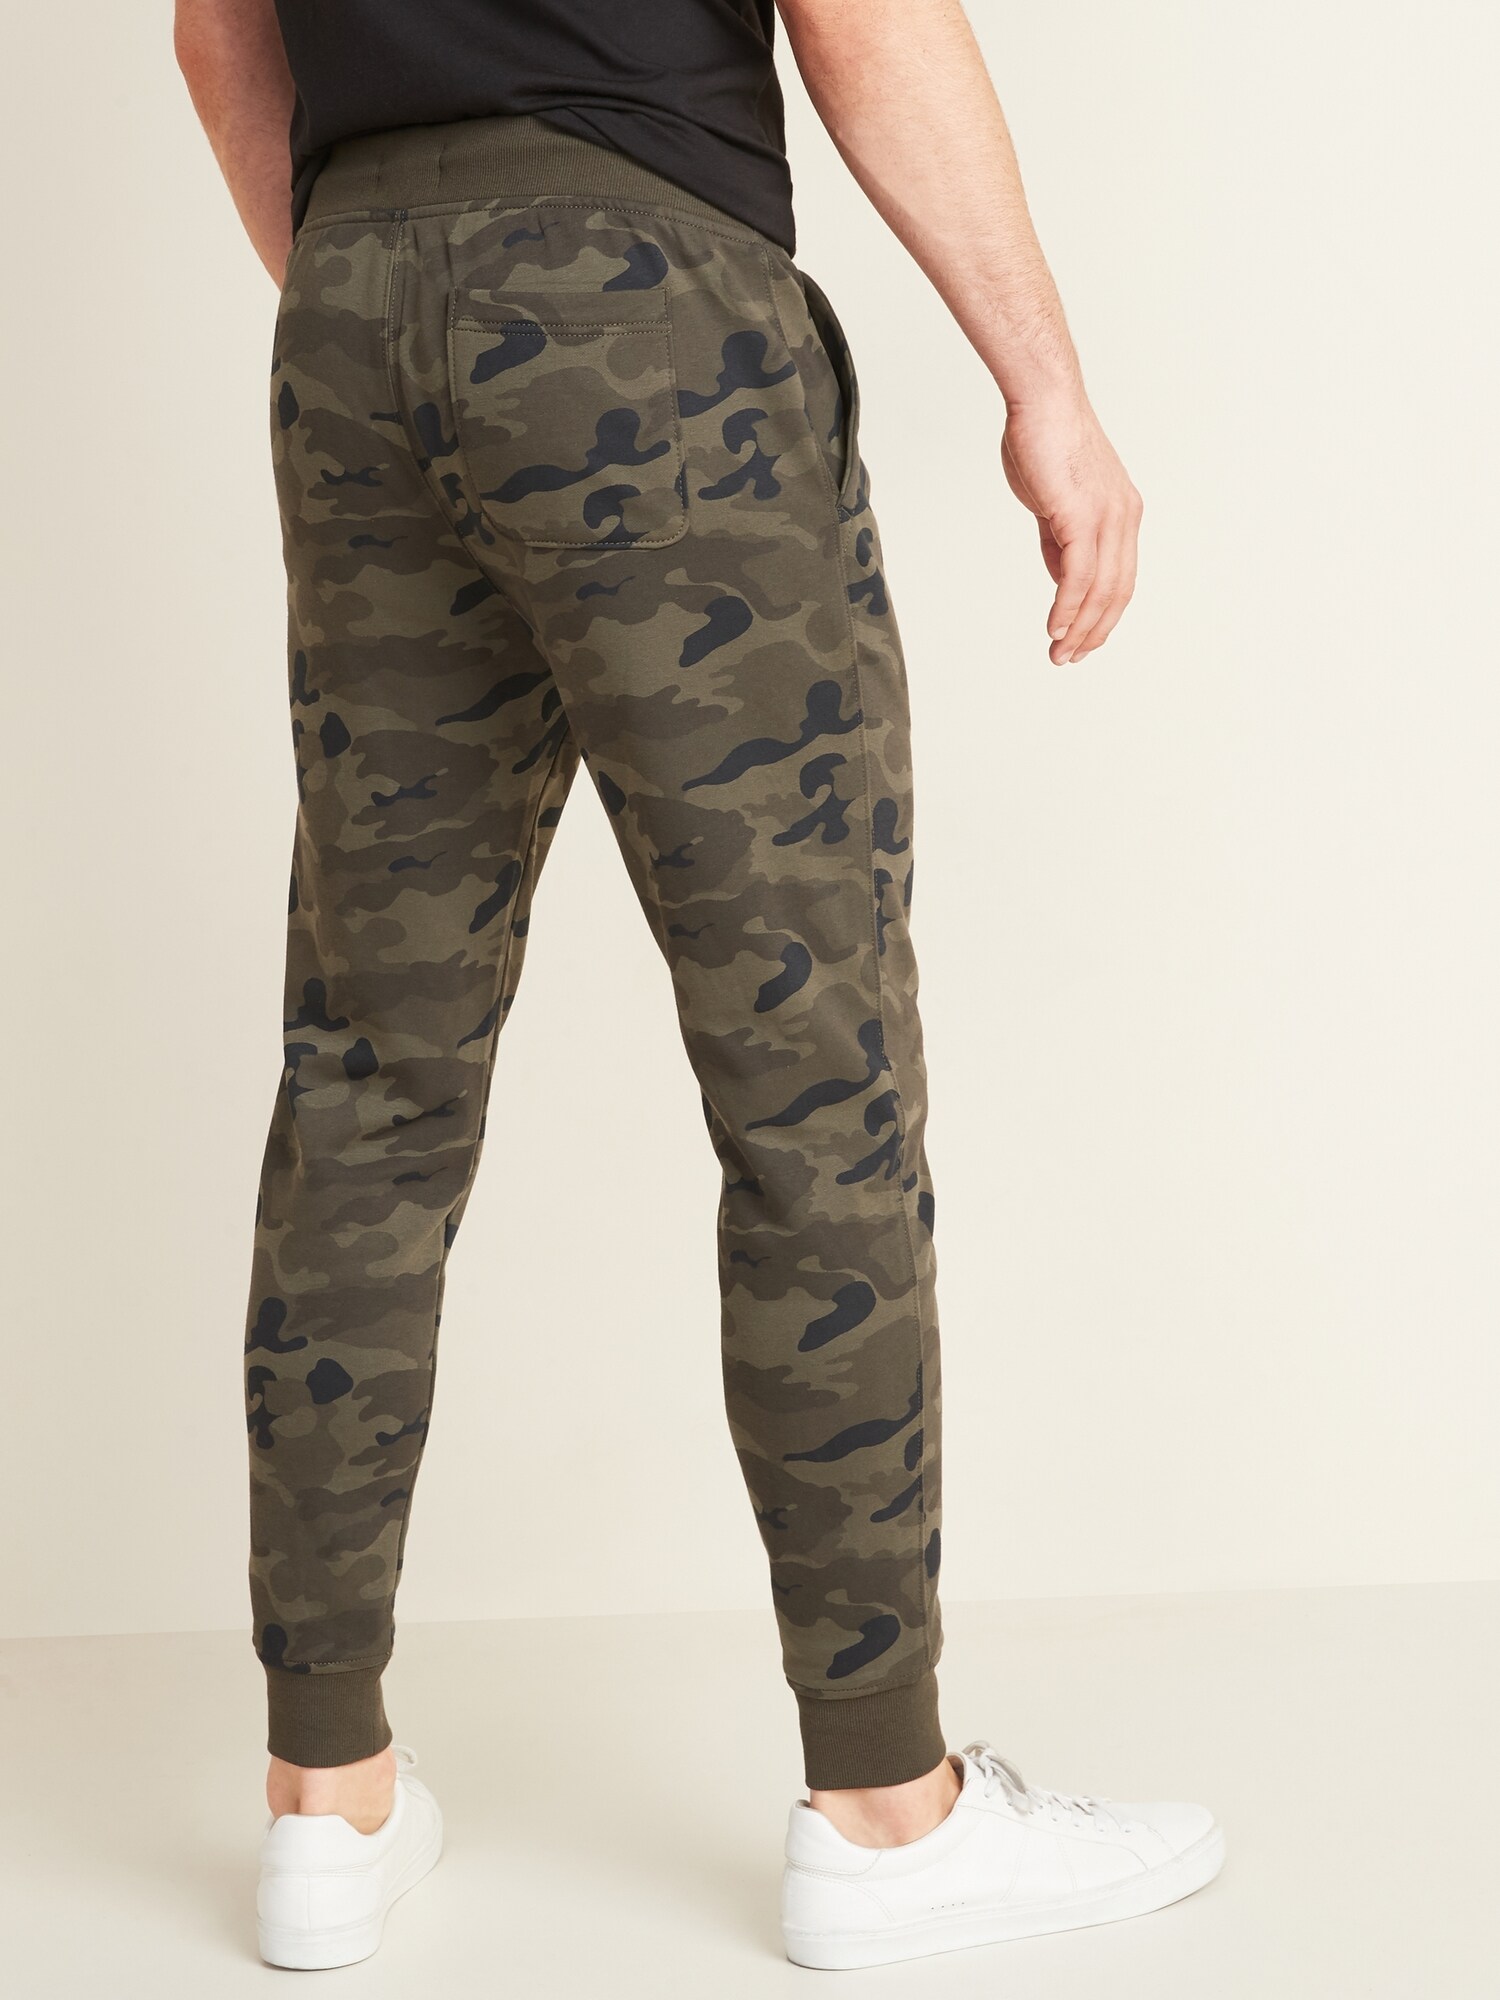 Camo Jogger Pants for Men | Old Navy